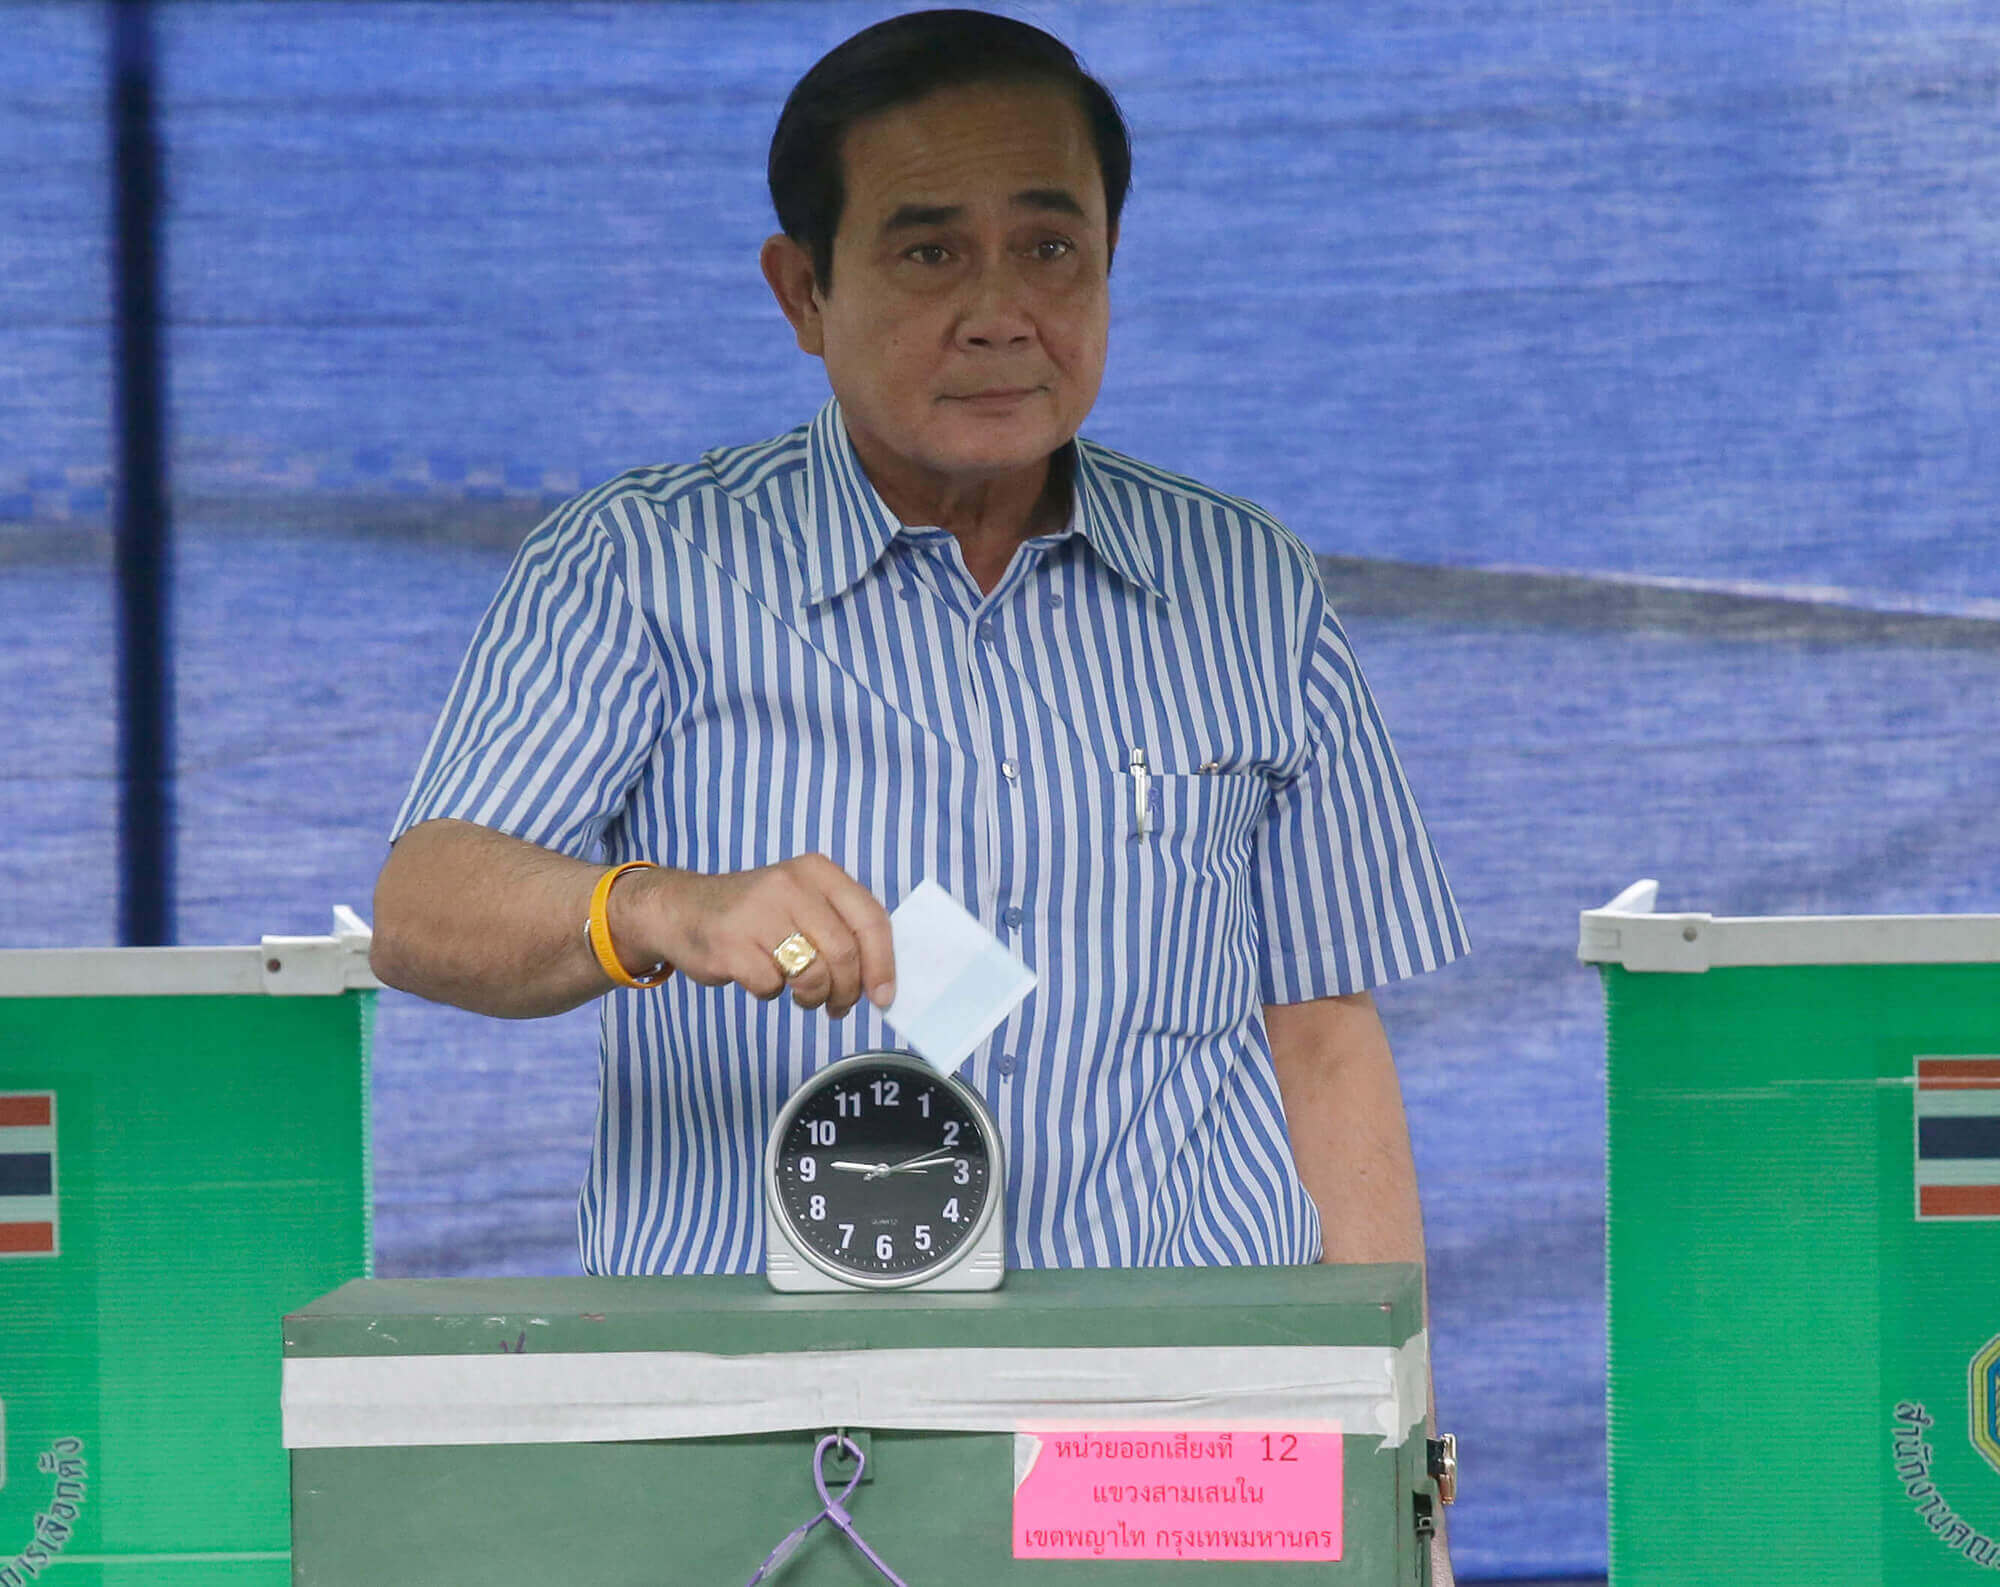 Image of Thailand's Prime Minister Prayuth Chan-ocha casting his vote